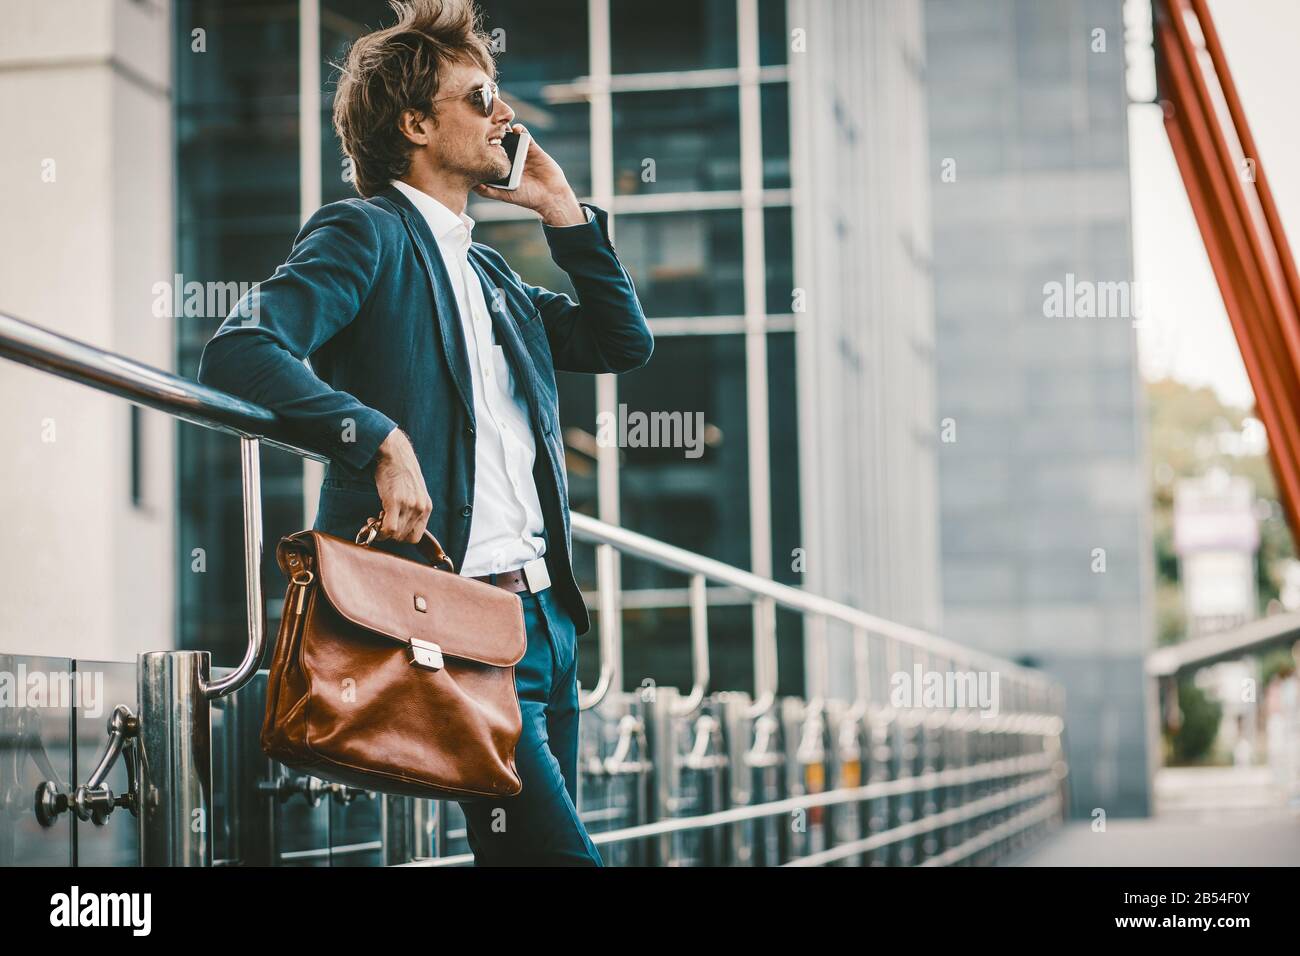 Young man in a sute standing outdoors and talking on the mobile phone and smiling Stock Photo